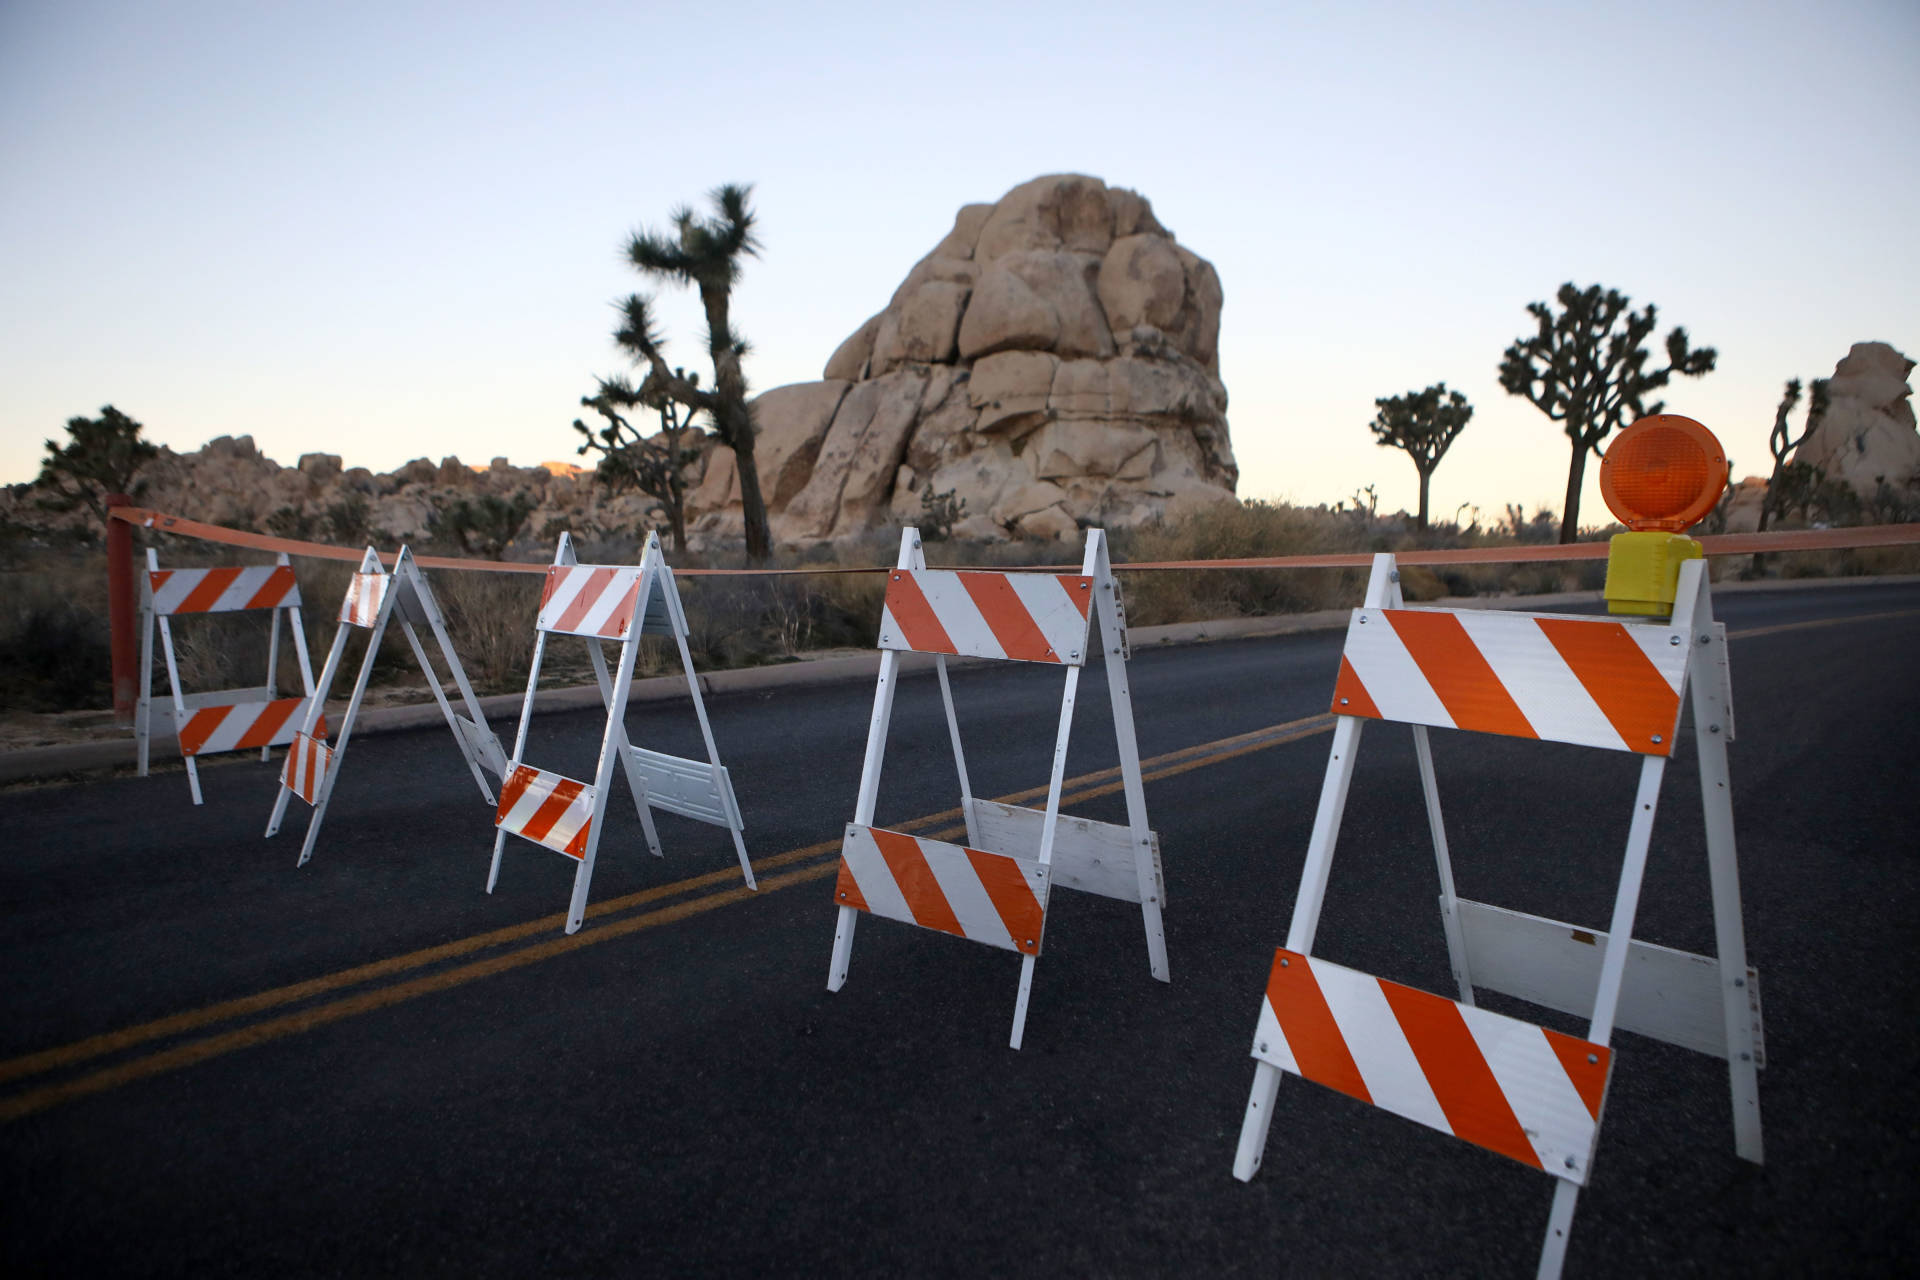 Barricades block a closed campground at Joshua Tree National Park on January 4, 2019. Campgrounds and some roads have been closed at the park due to safety concerns as the park is drastically understaffed during the partial government shutdown.  Mario Tama/Getty Images